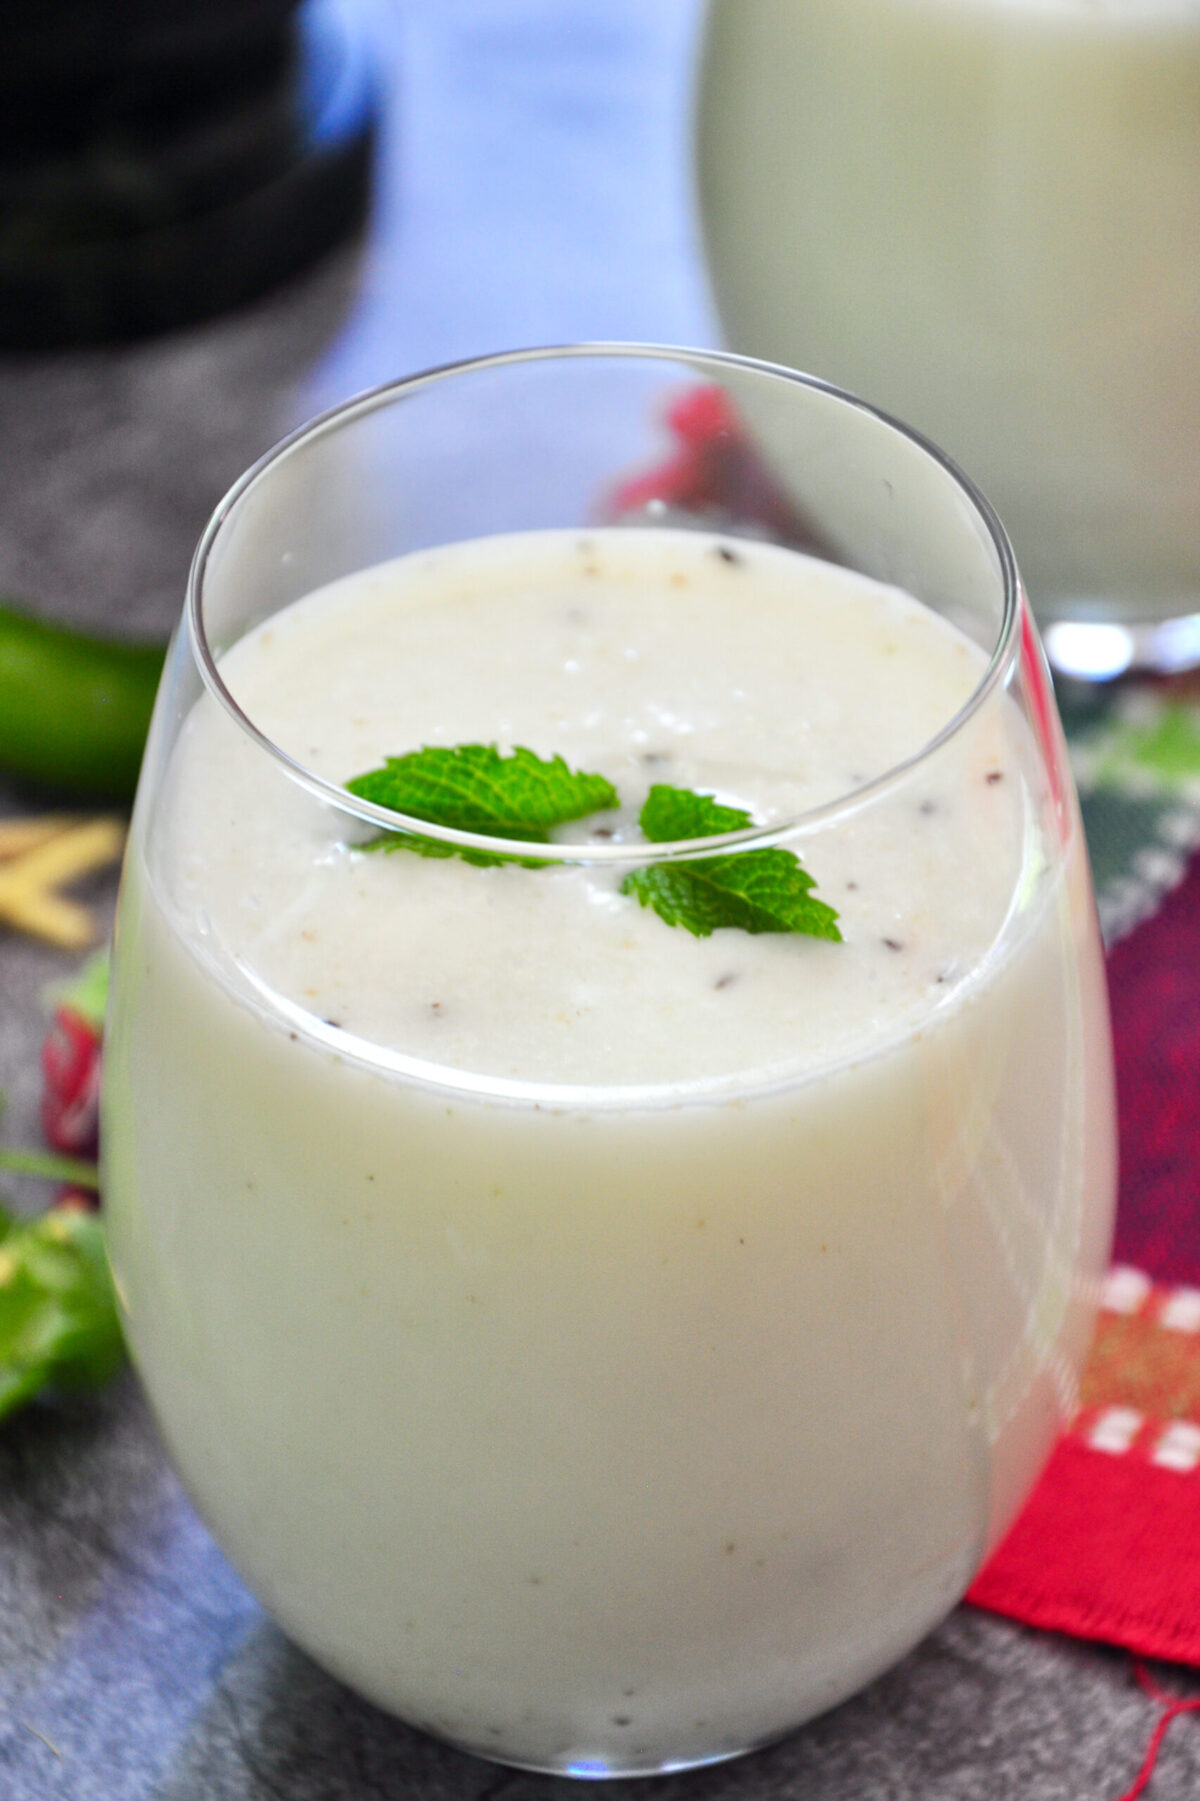 buttermilk in a glass and garnished with mint leaves